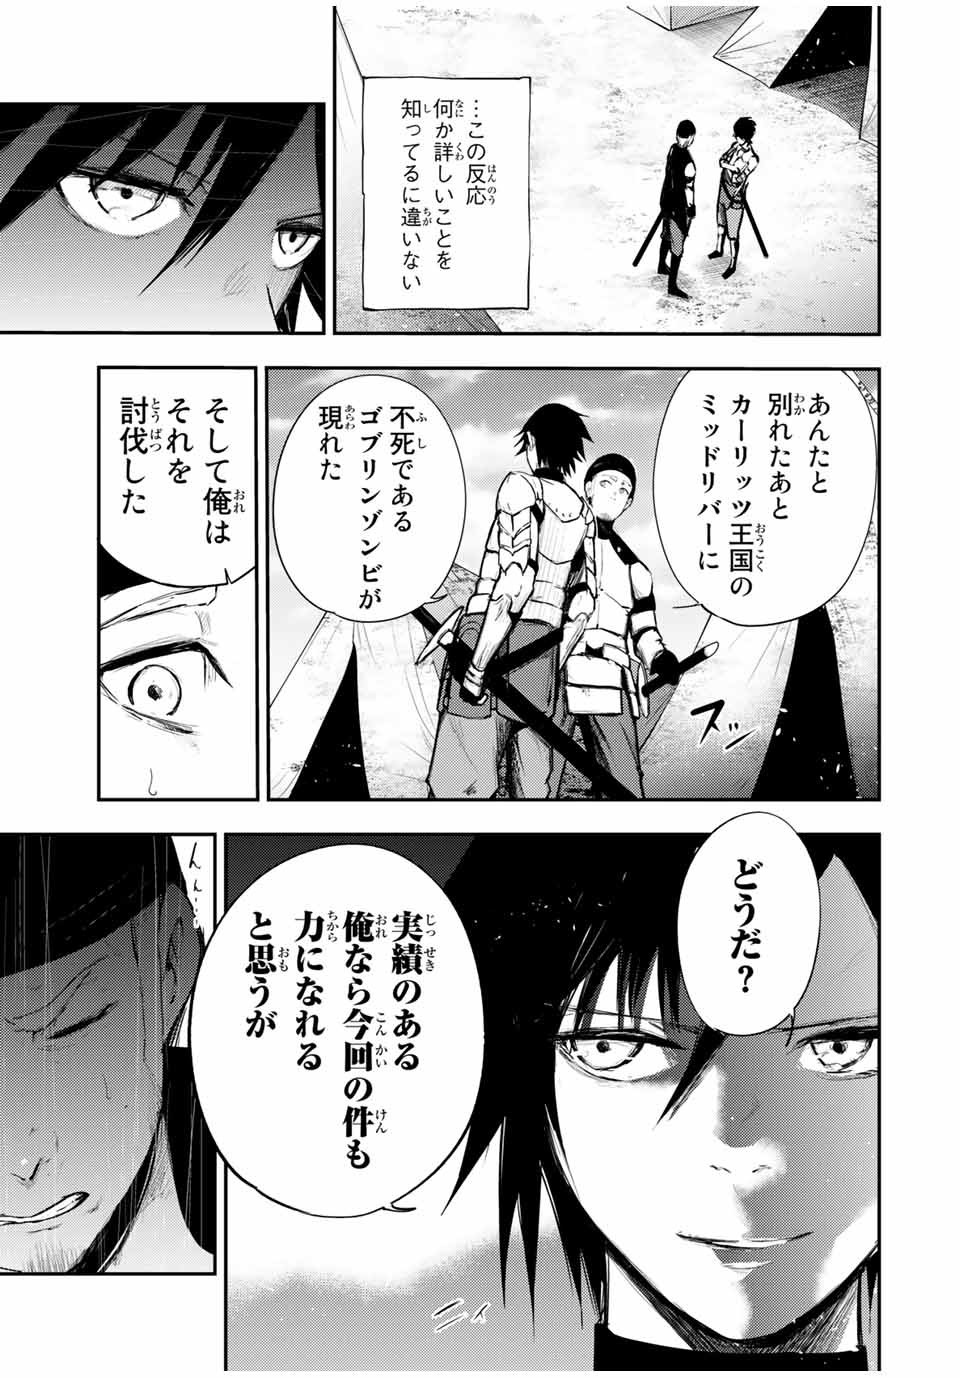 the strongest former prince-; 奴隷転生 ～その奴隷、最強の元王子につき～ 第27話 - Page 15